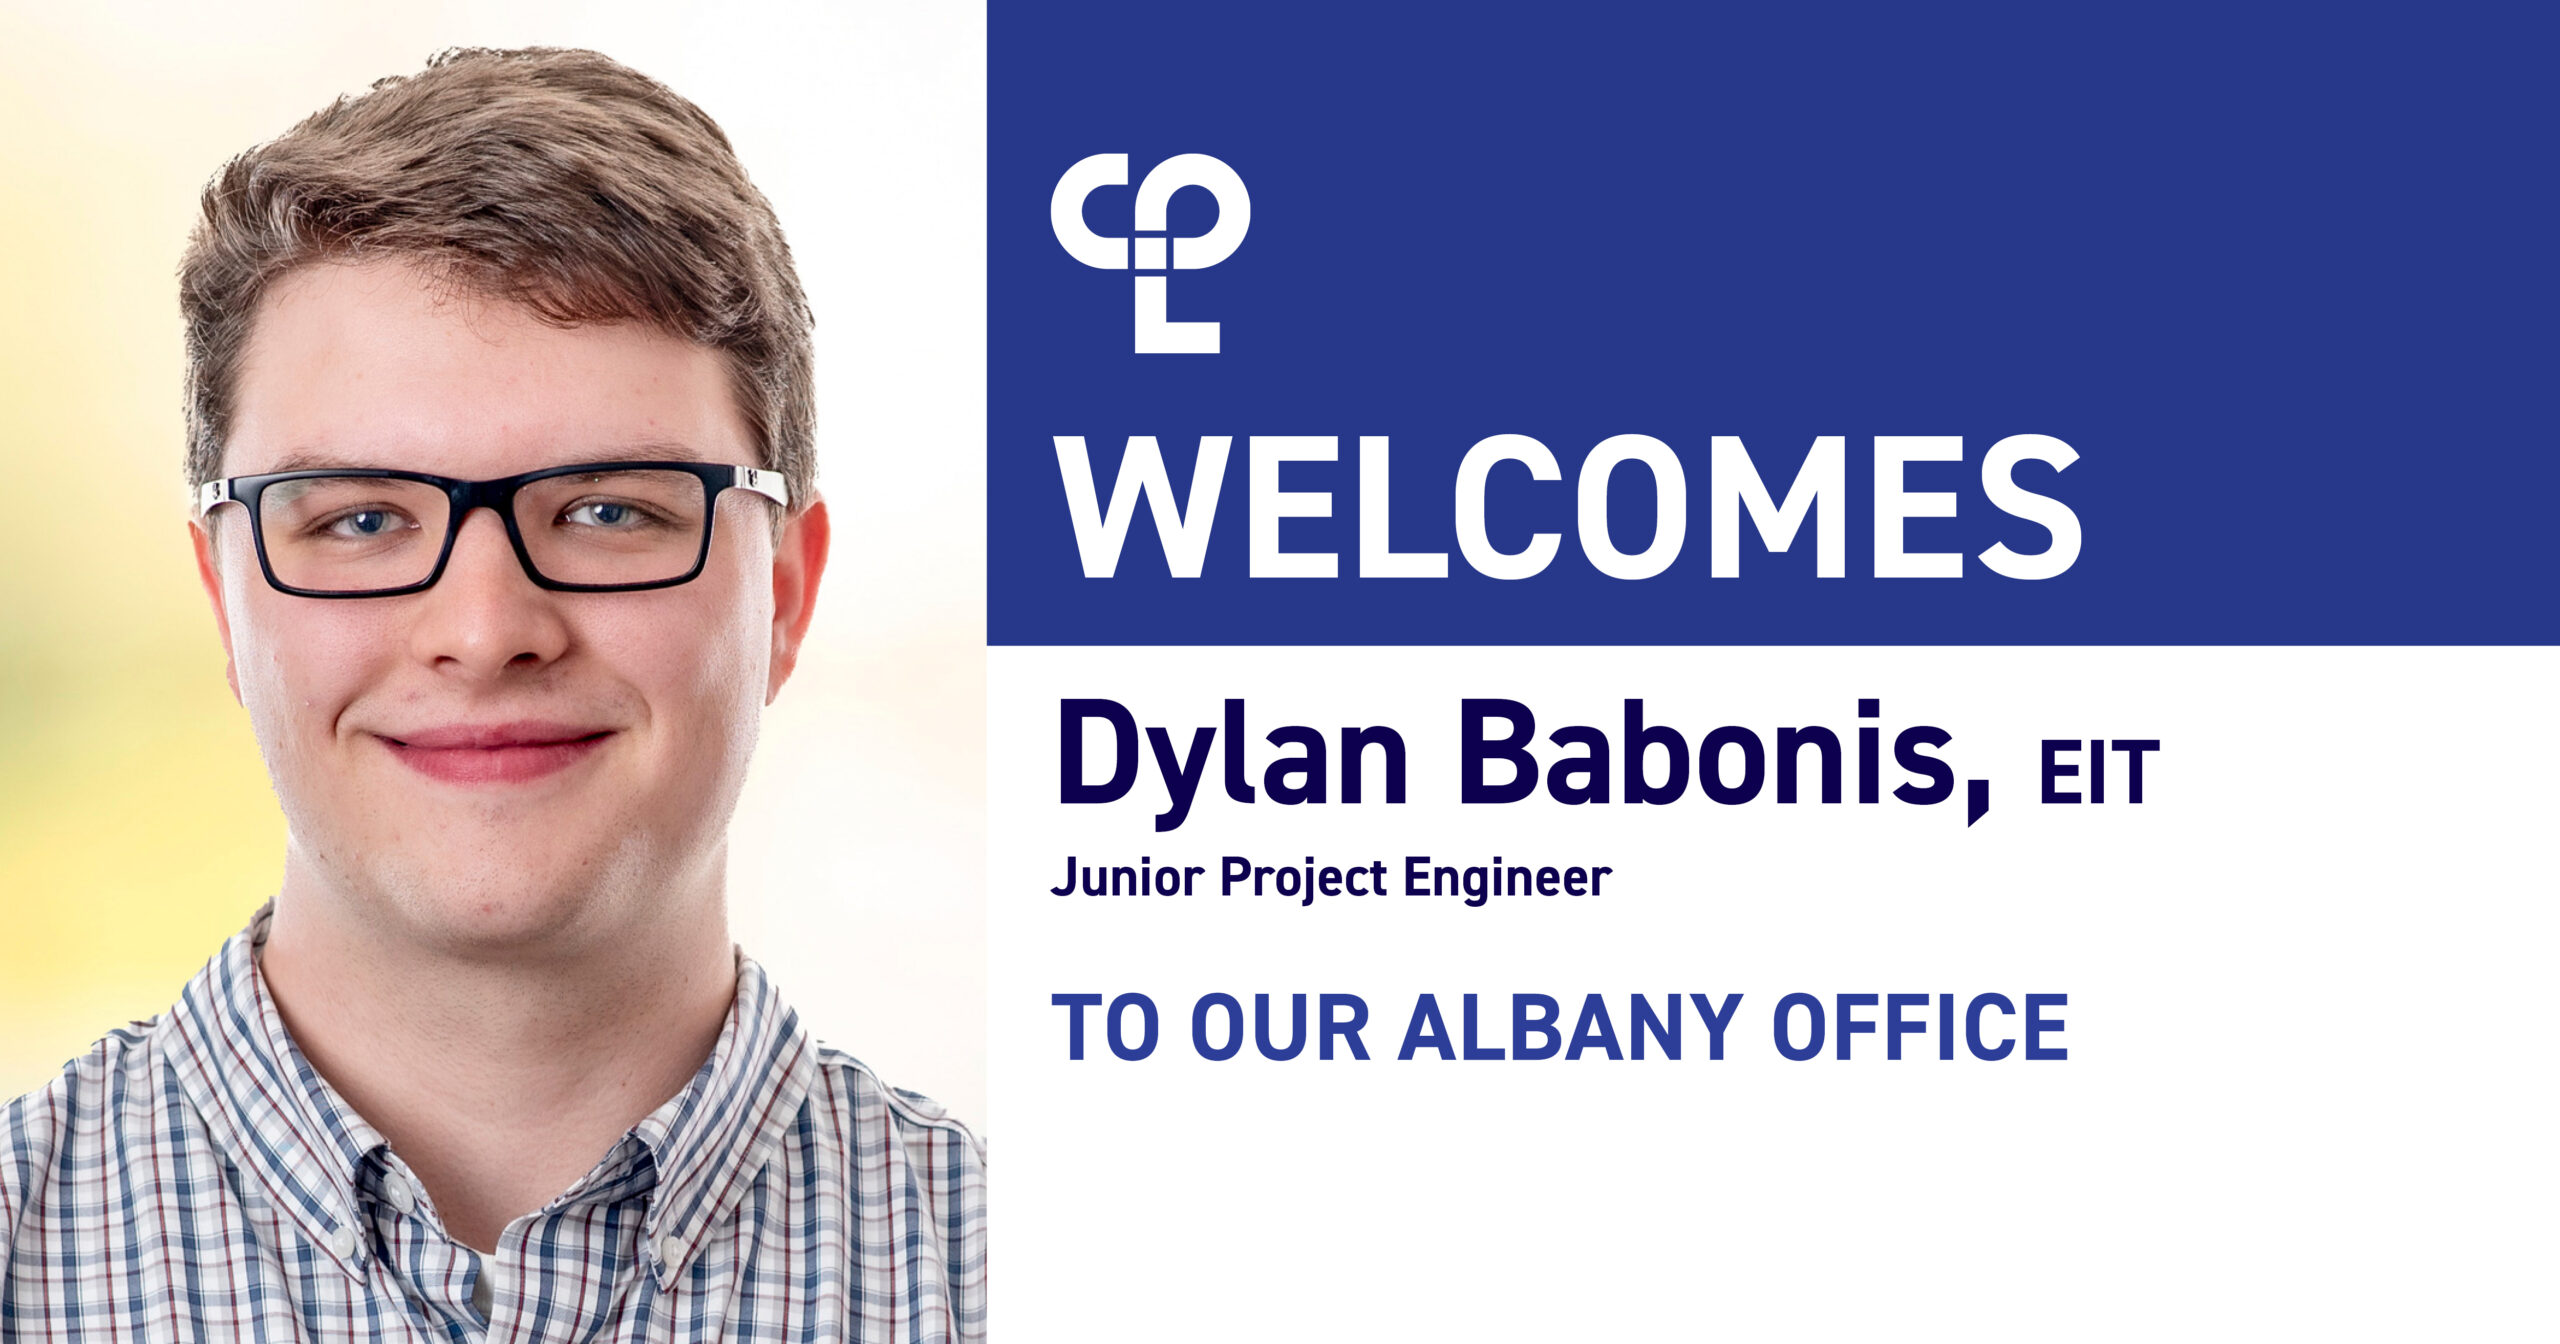 image is a graphic that shows on the right, a white man with light brown hair and glasses. He's wearing a blue plaid shirt On the right it reads "CPL welcomes Dylan Babonis, EIT, Junior Project Engineer, to our Albany Office"